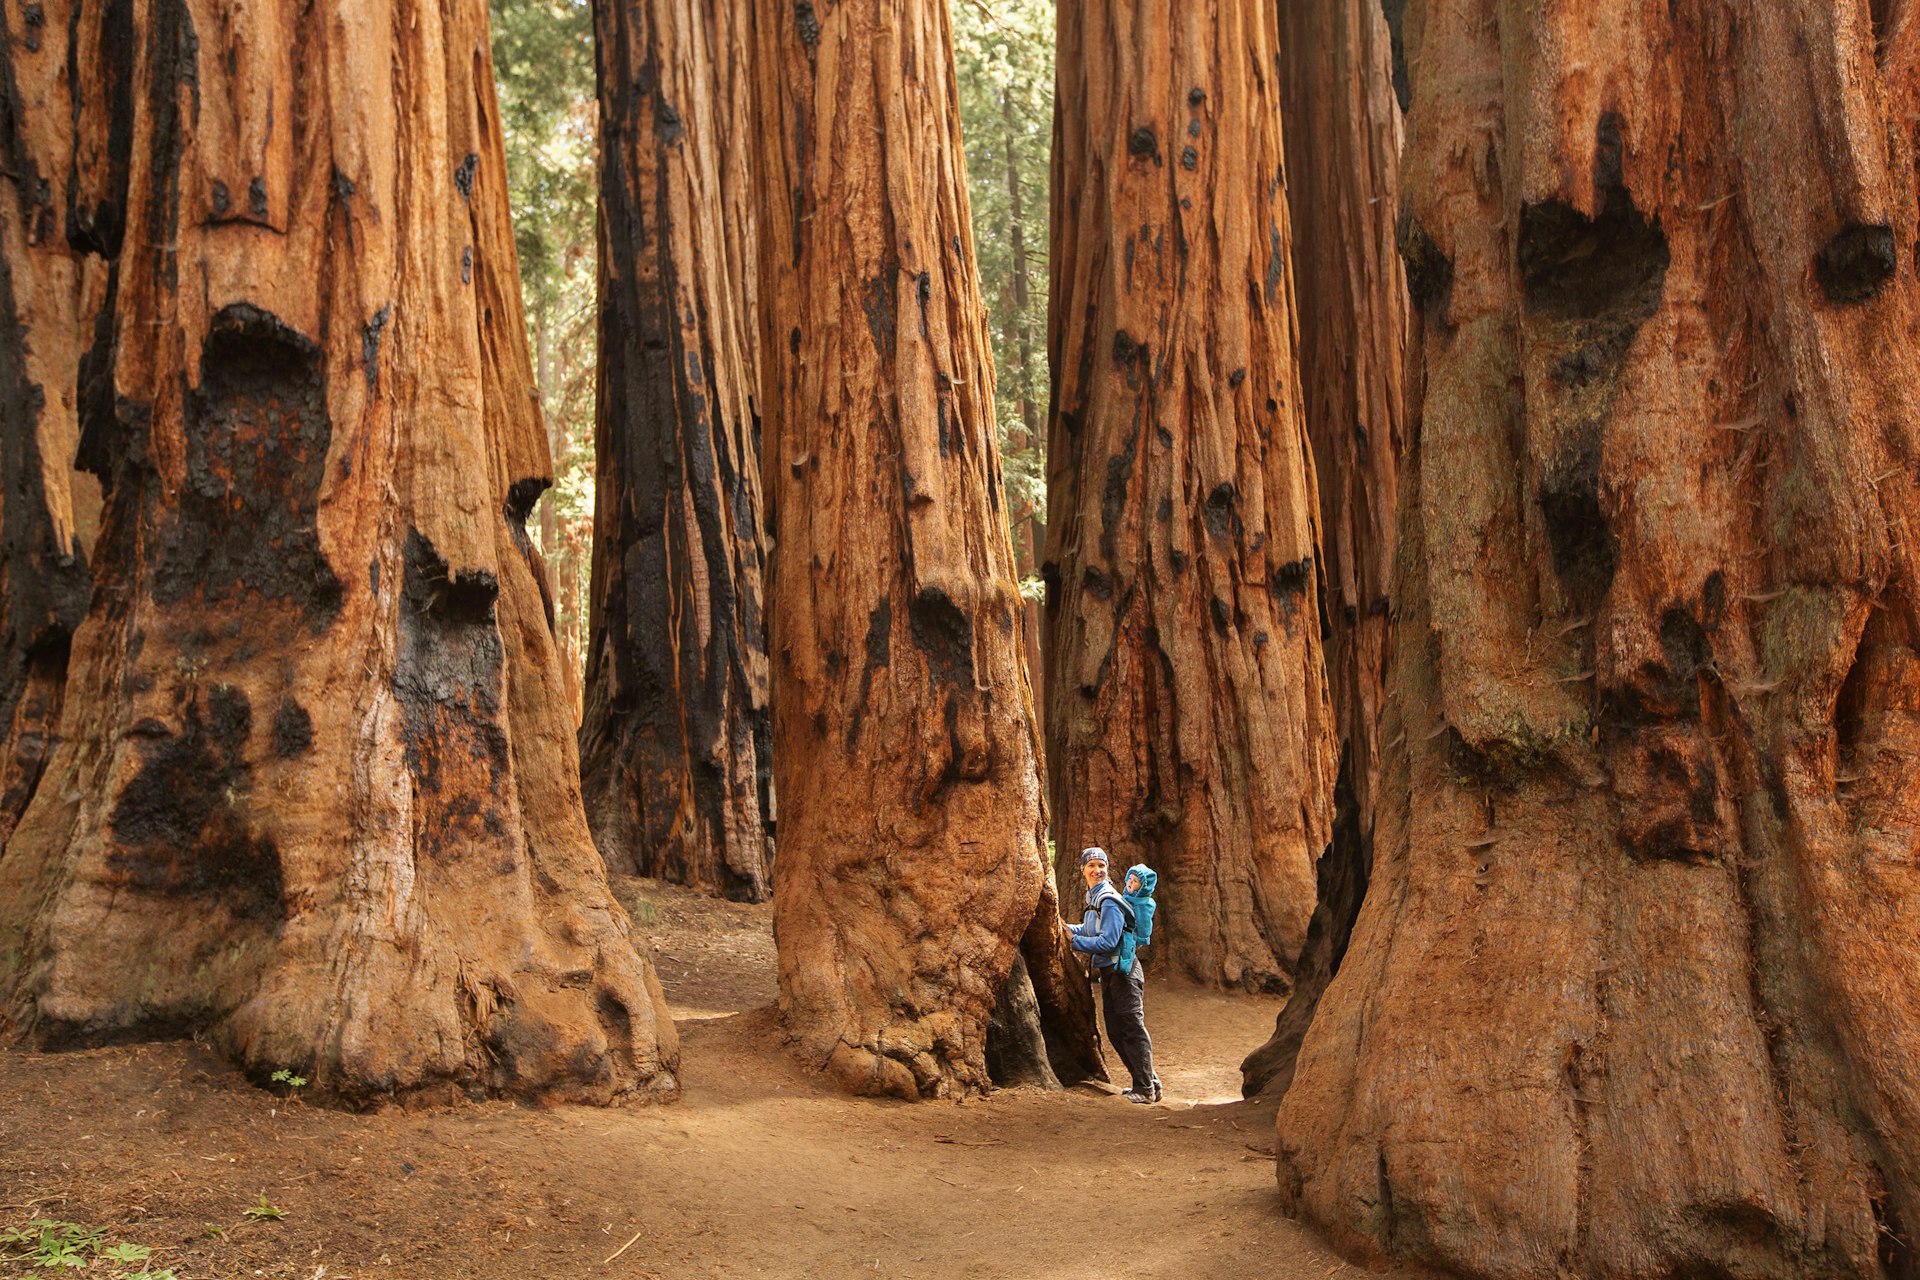 Mother with infant on her back at the the base of giant Sequoia trees